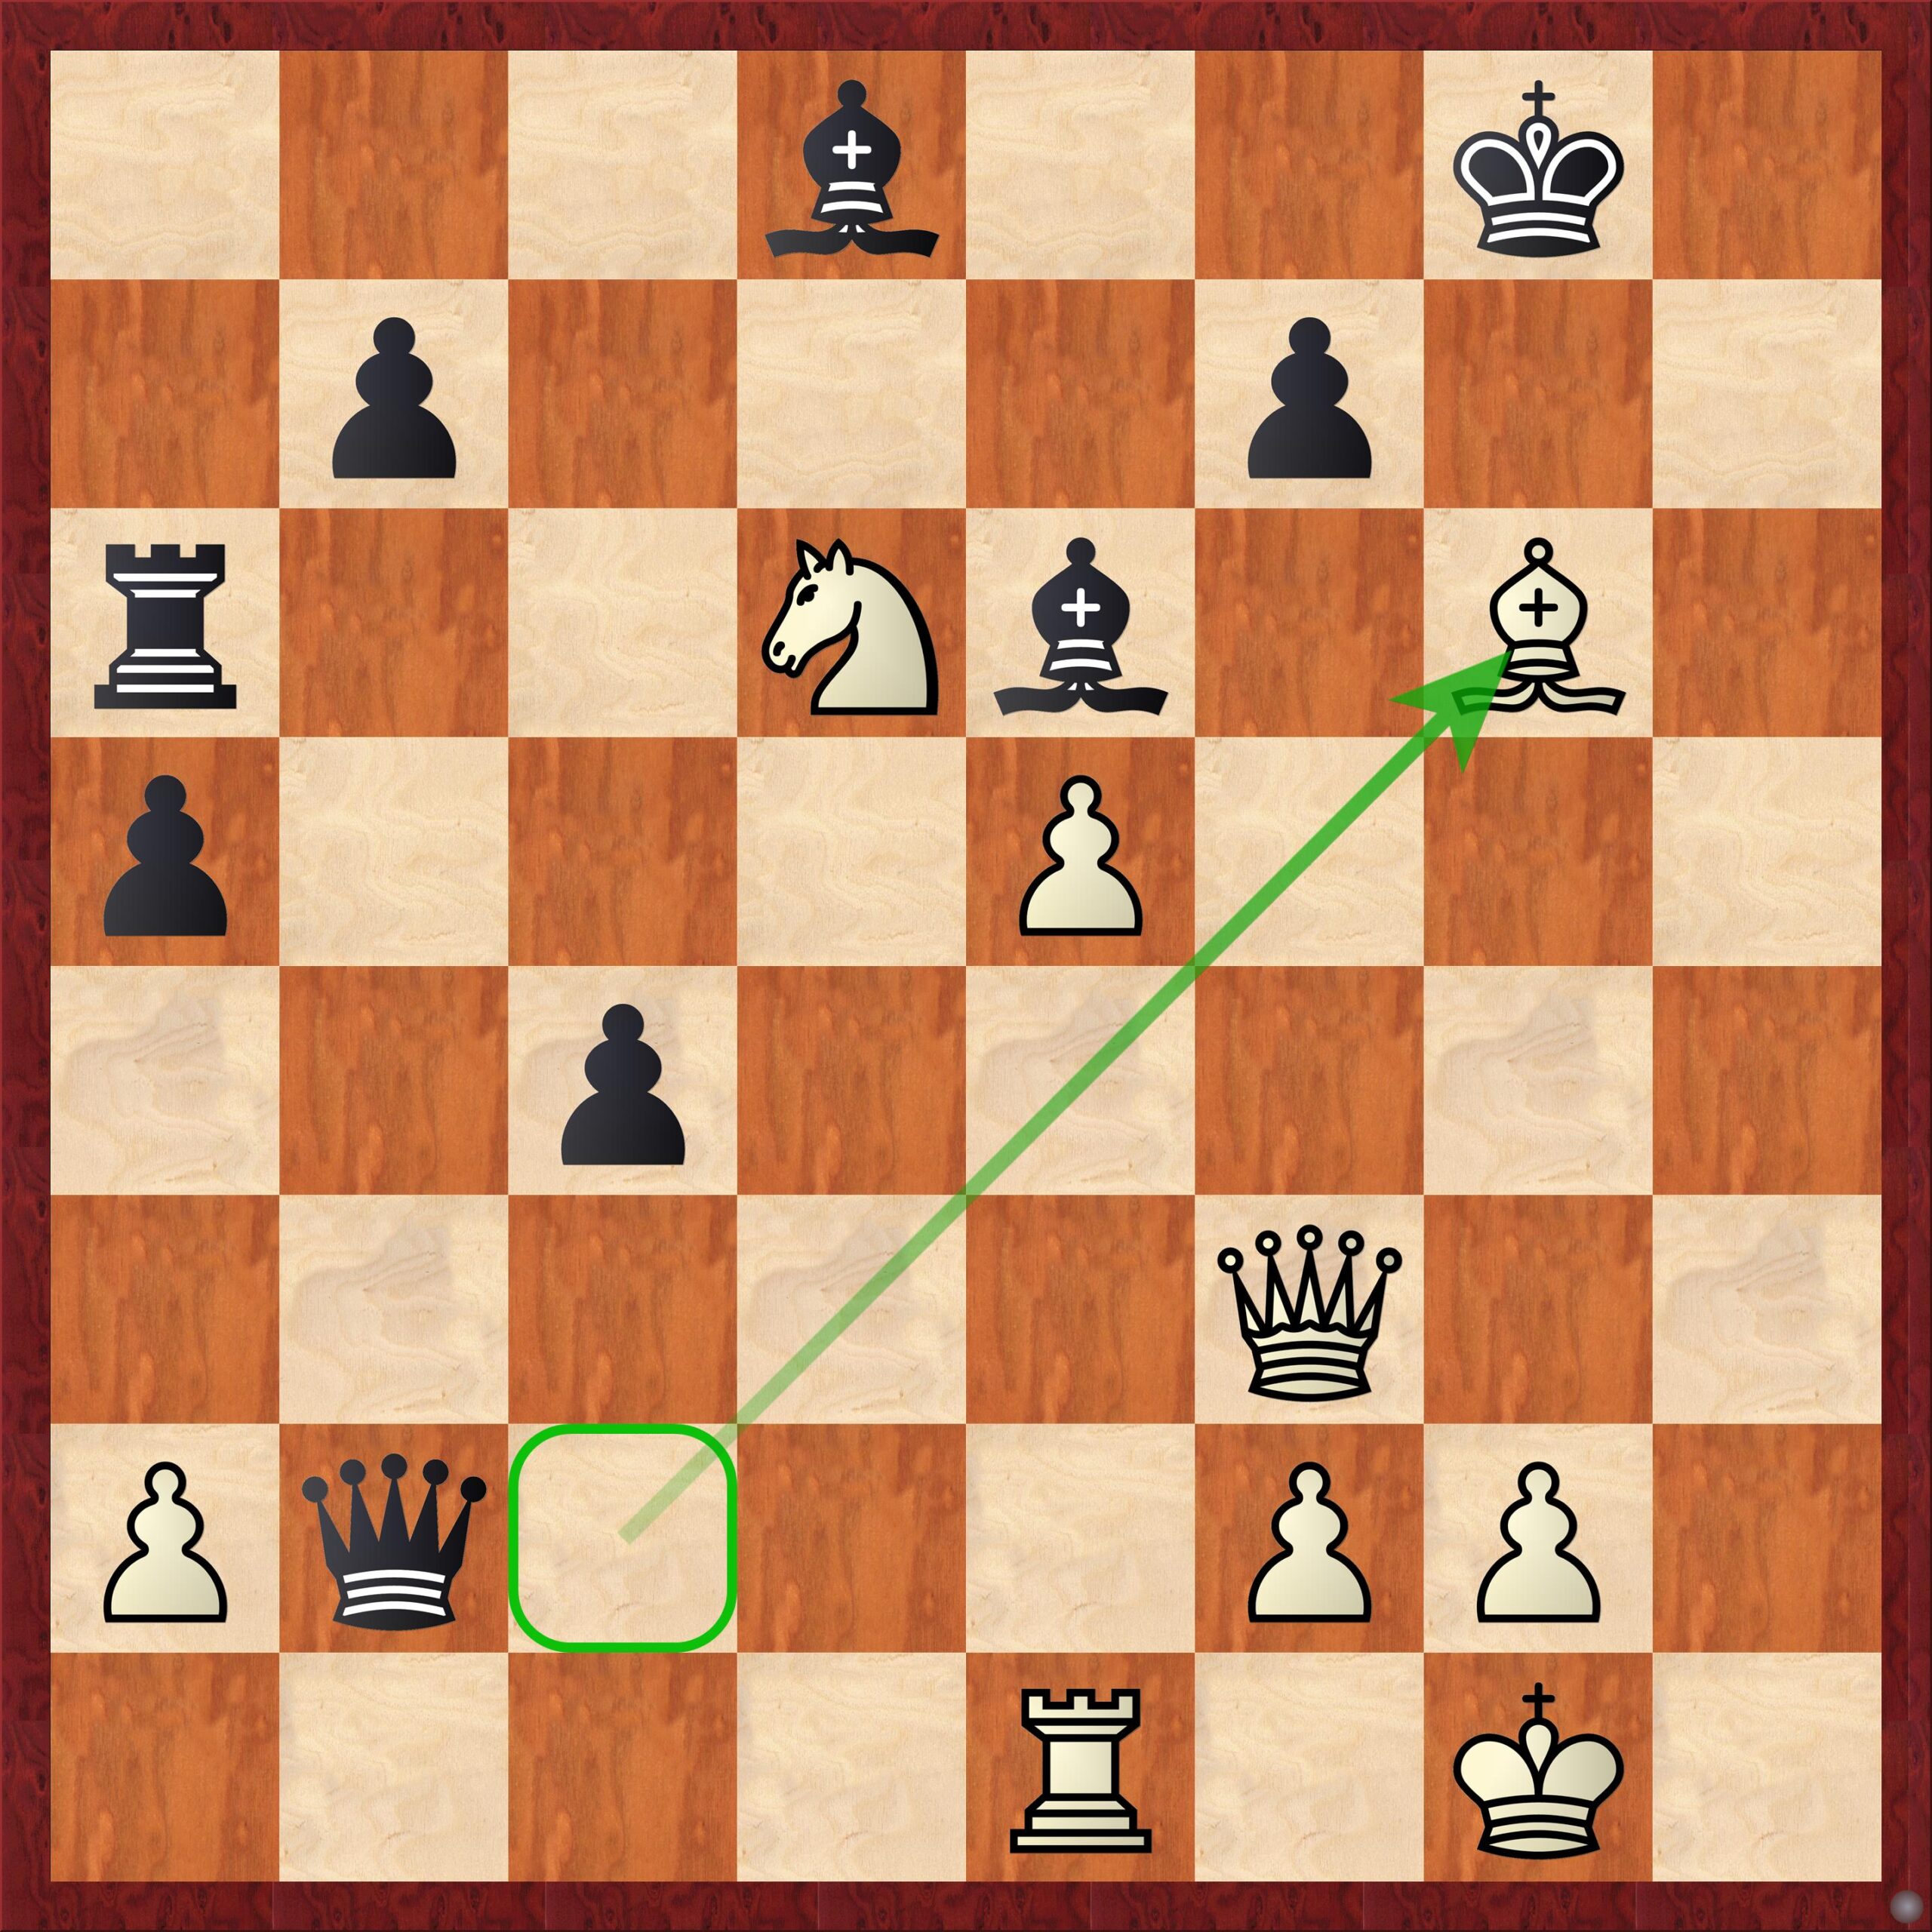 FIDE - International Chess Federation - Hikaru Nakamura defeats  Jan-Krzysztof Duda in 52 moves with White to move to a clear second place  (7½ out of 13) with one round to go.